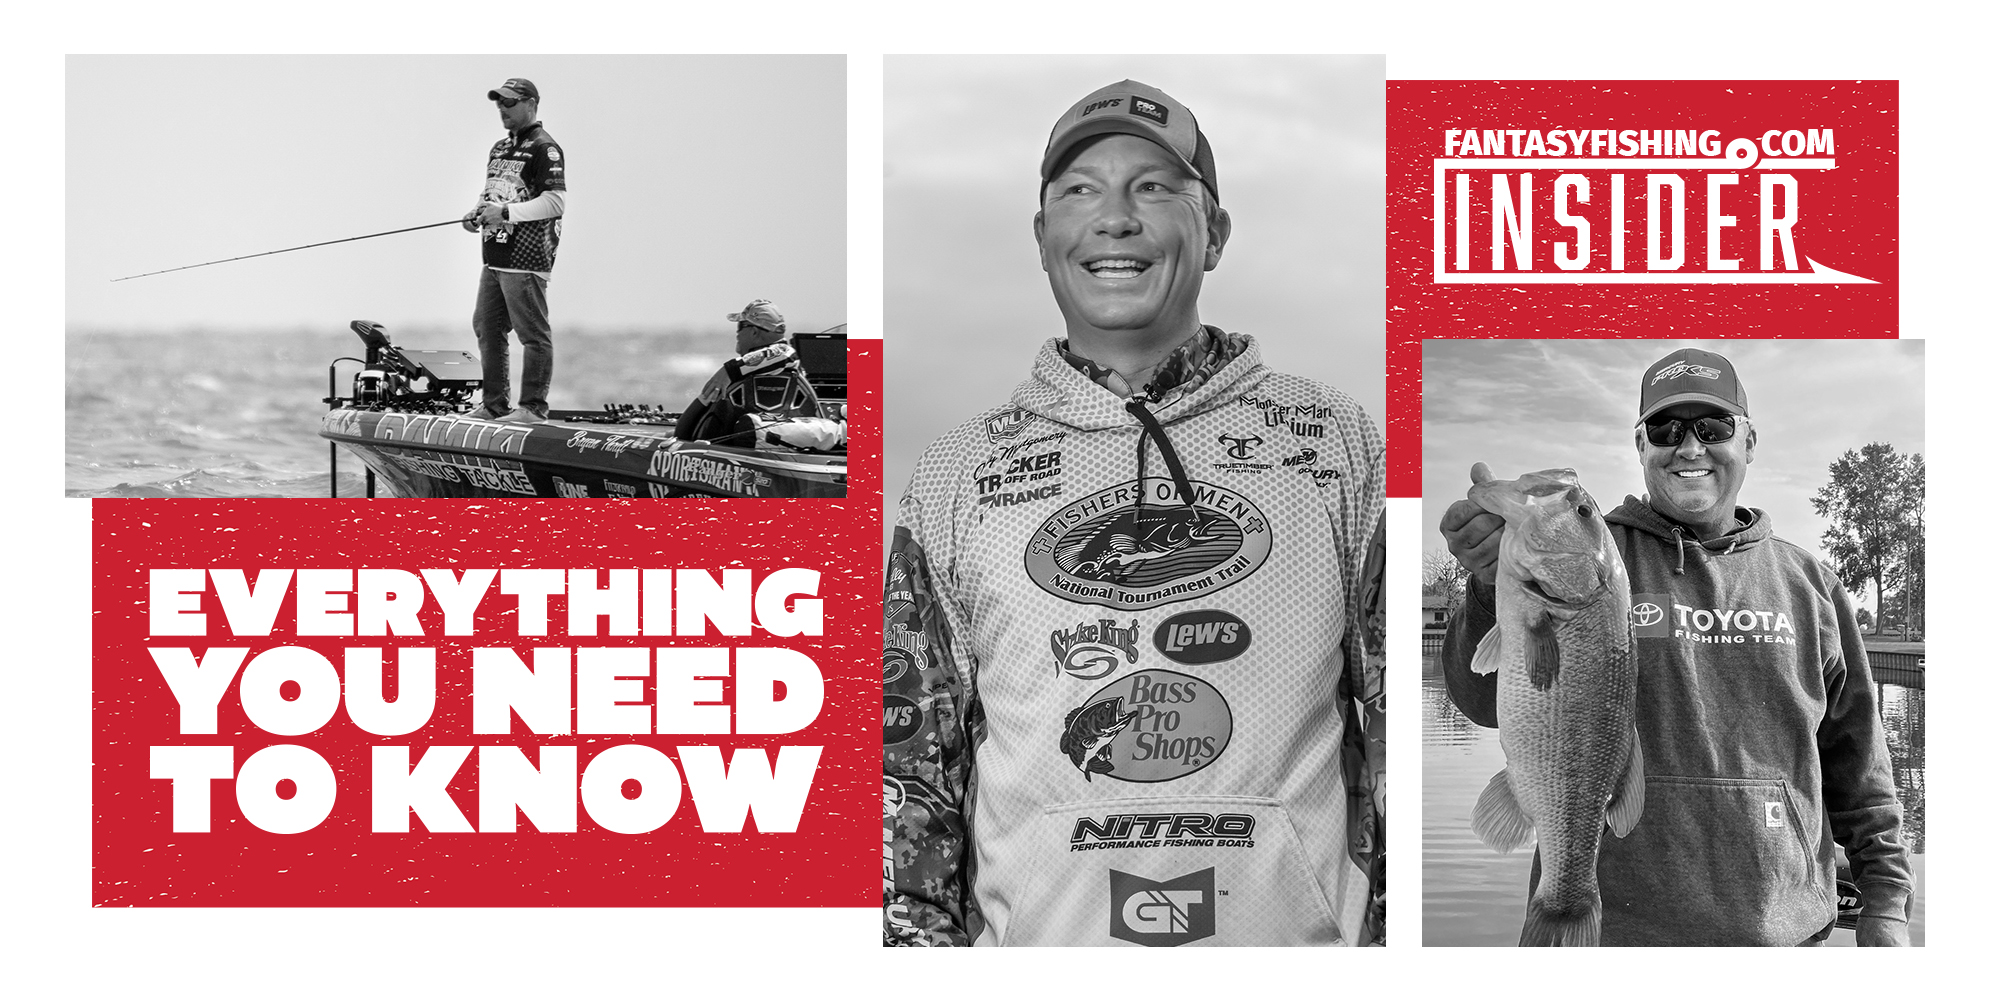 Land of Giants: Hunting the brutes of June - Bassmaster